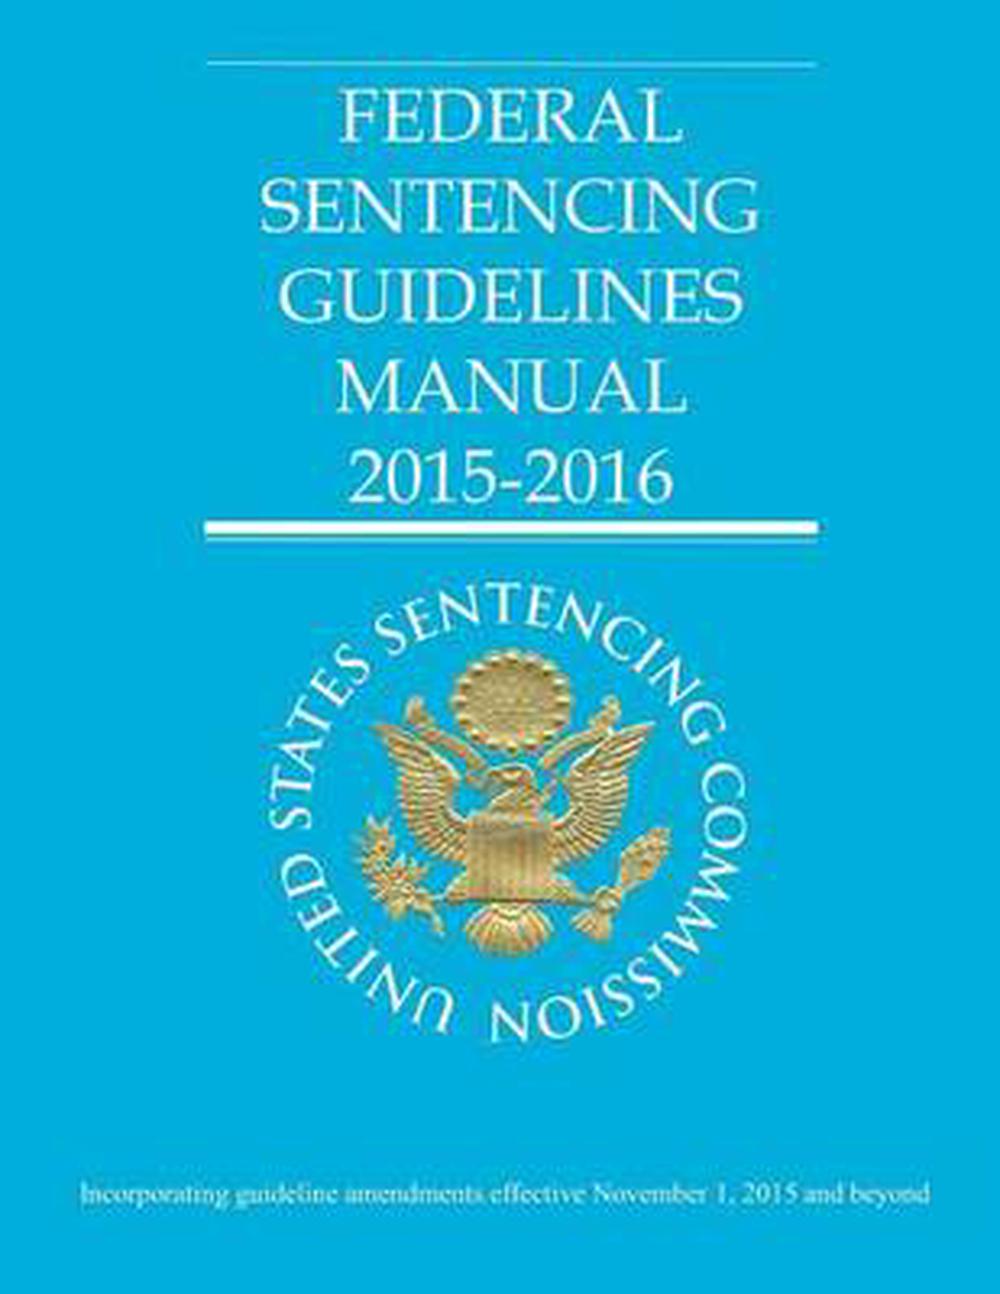 federal-sentencing-guidelines-manual-2015-2016-by-united-states-sentencing-commi-9781518853104